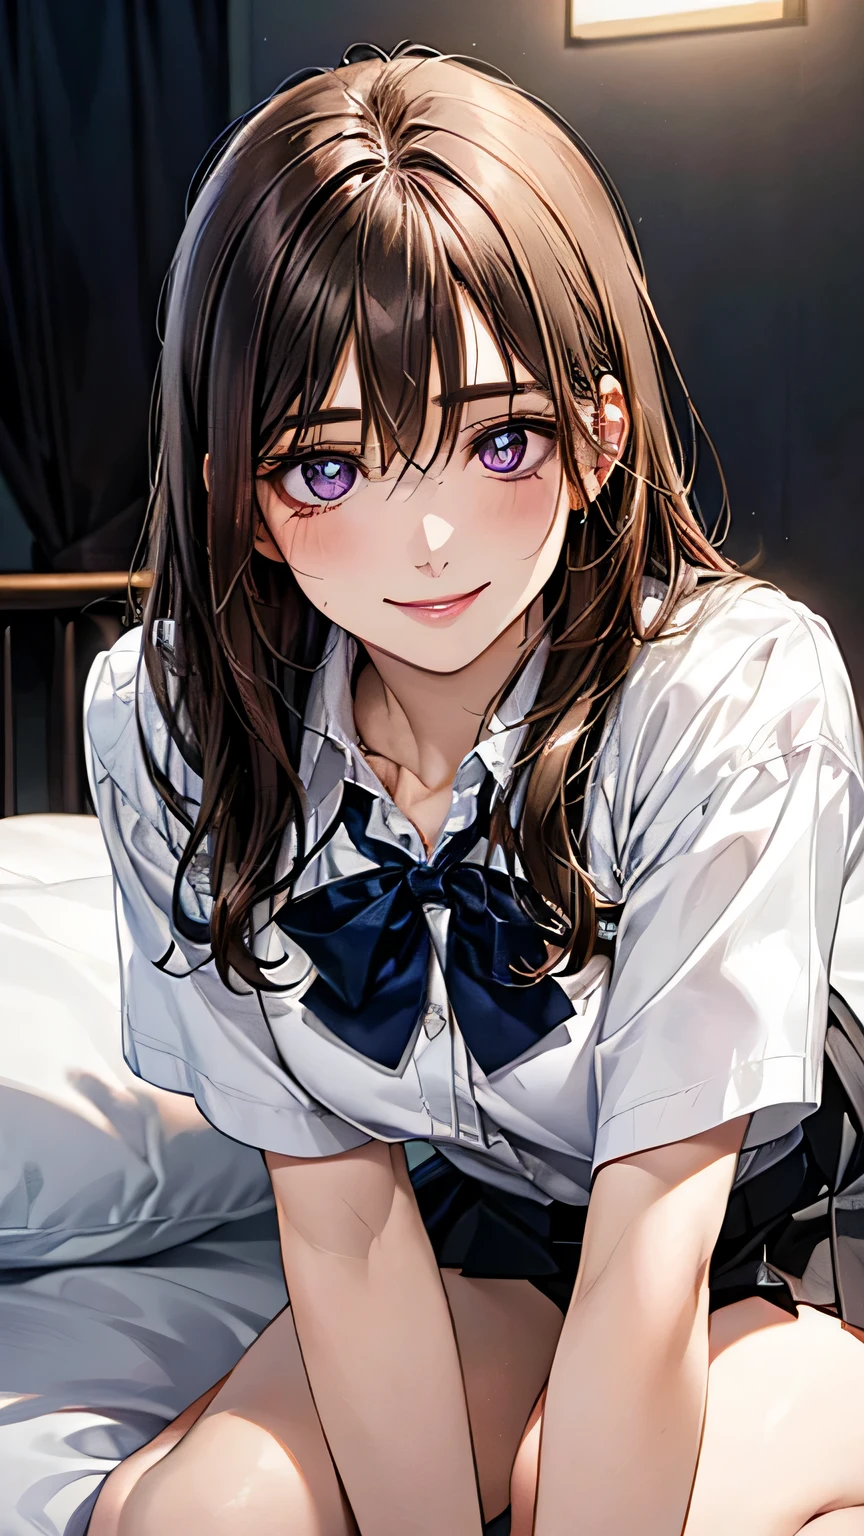 (((brown hair))),(((lie down in bed))),(((skirt lift))),(masterpiece:1.2, top-quality), (realistic, photorealistic:1.4), beautiful illustration, (natural side lighting, movie lighting), 
looking at viewer, 1 girl, japanese, high school girl, perfect face, cute and symmetrical face, shiny skin, 
(long hair:1.5, straight hair:1.4, grey hair), hair between eyes, purple eyes, glowing eyes, big eyes, long eye lasher, (medium breasts), slender, 
beautiful hair, beautiful face, beautiful detailed eyes, beautiful clavicle, beautiful body, beautiful chest, beautiful thigh, beautiful legs, beautiful fingers, 
((JP , white collared shirts, navy pleated mini skirt)), 
(beautiful scenery), evening, (Bedroom),, standing, (lovely smile, upper eyes), 